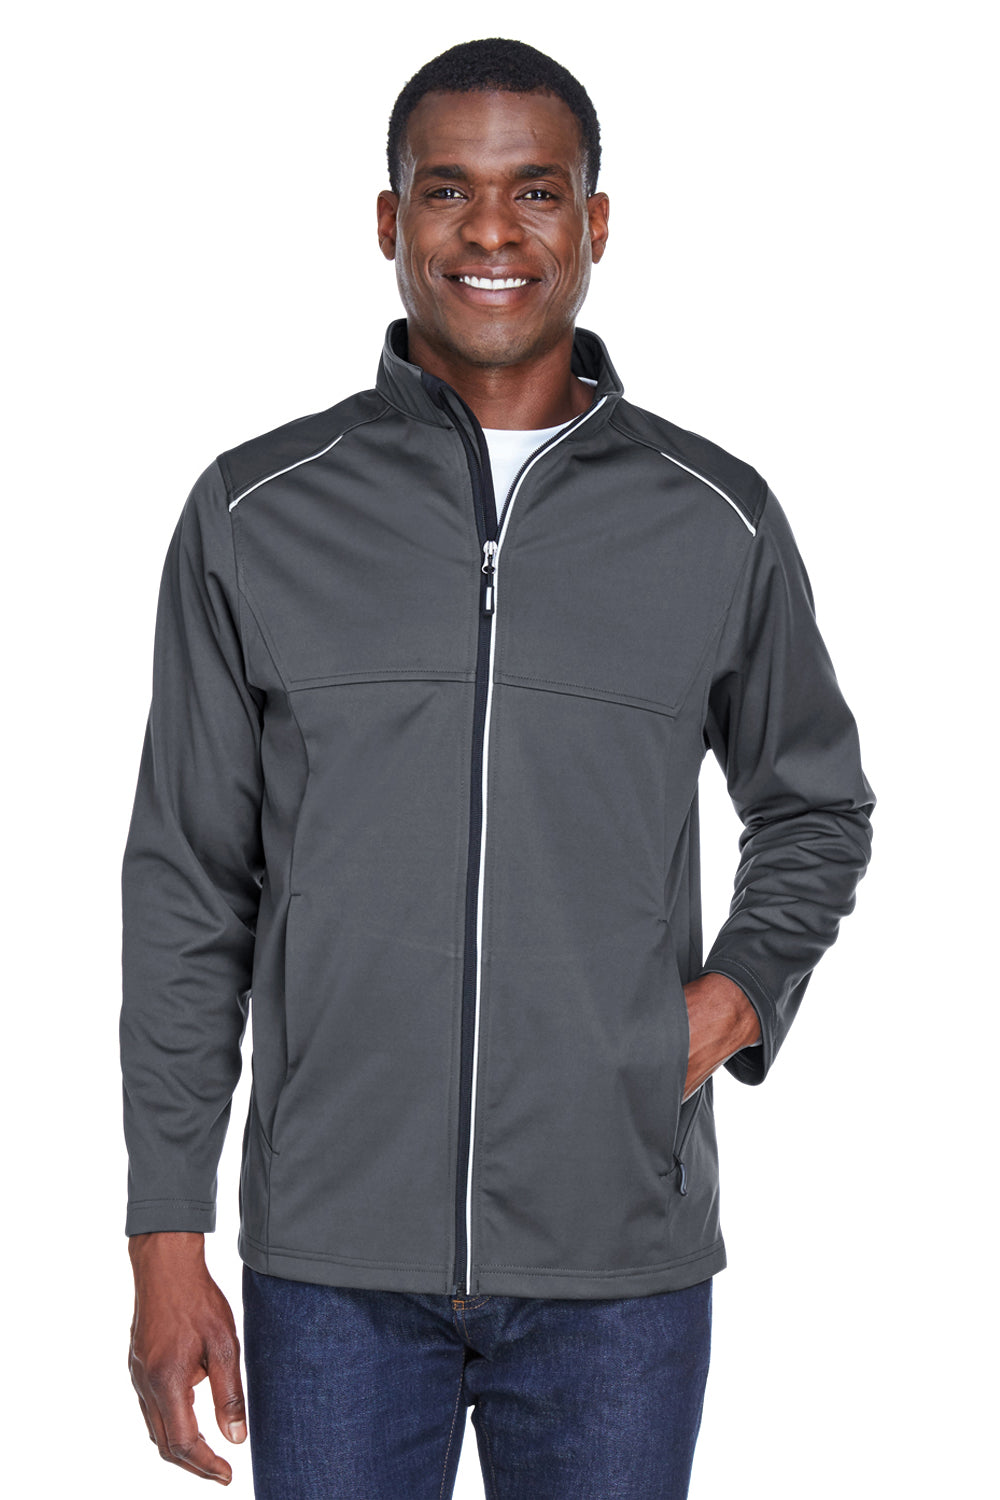 Core 365 CE708 Mens Techno Lite Water Resistant Full Zip Jacket Carbon Grey Front